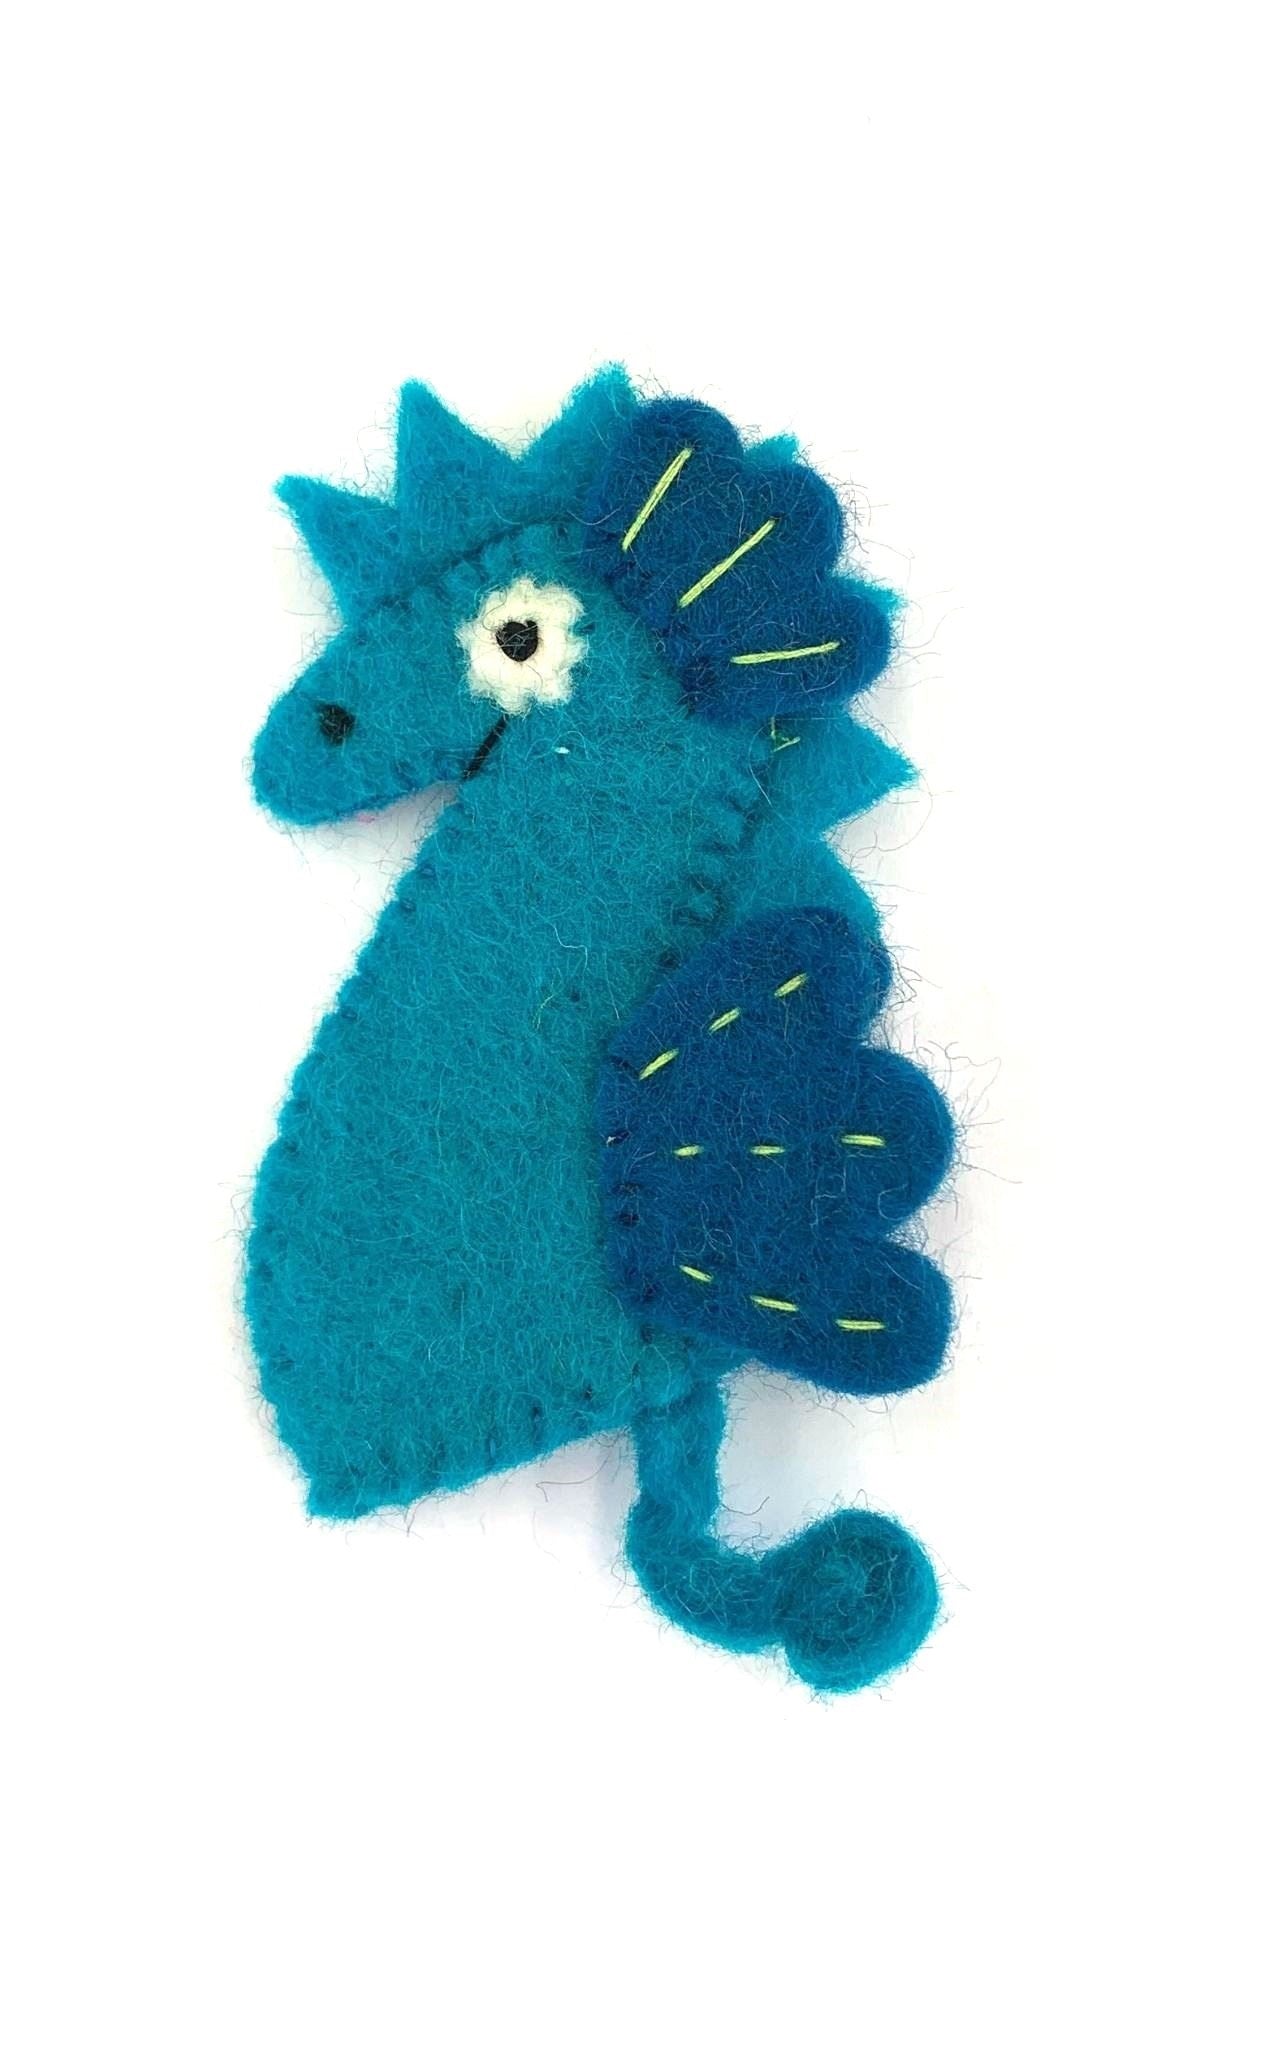 Surya Australia Ethical Wool Felt Finger Puppets made in Nepal - Seahorse